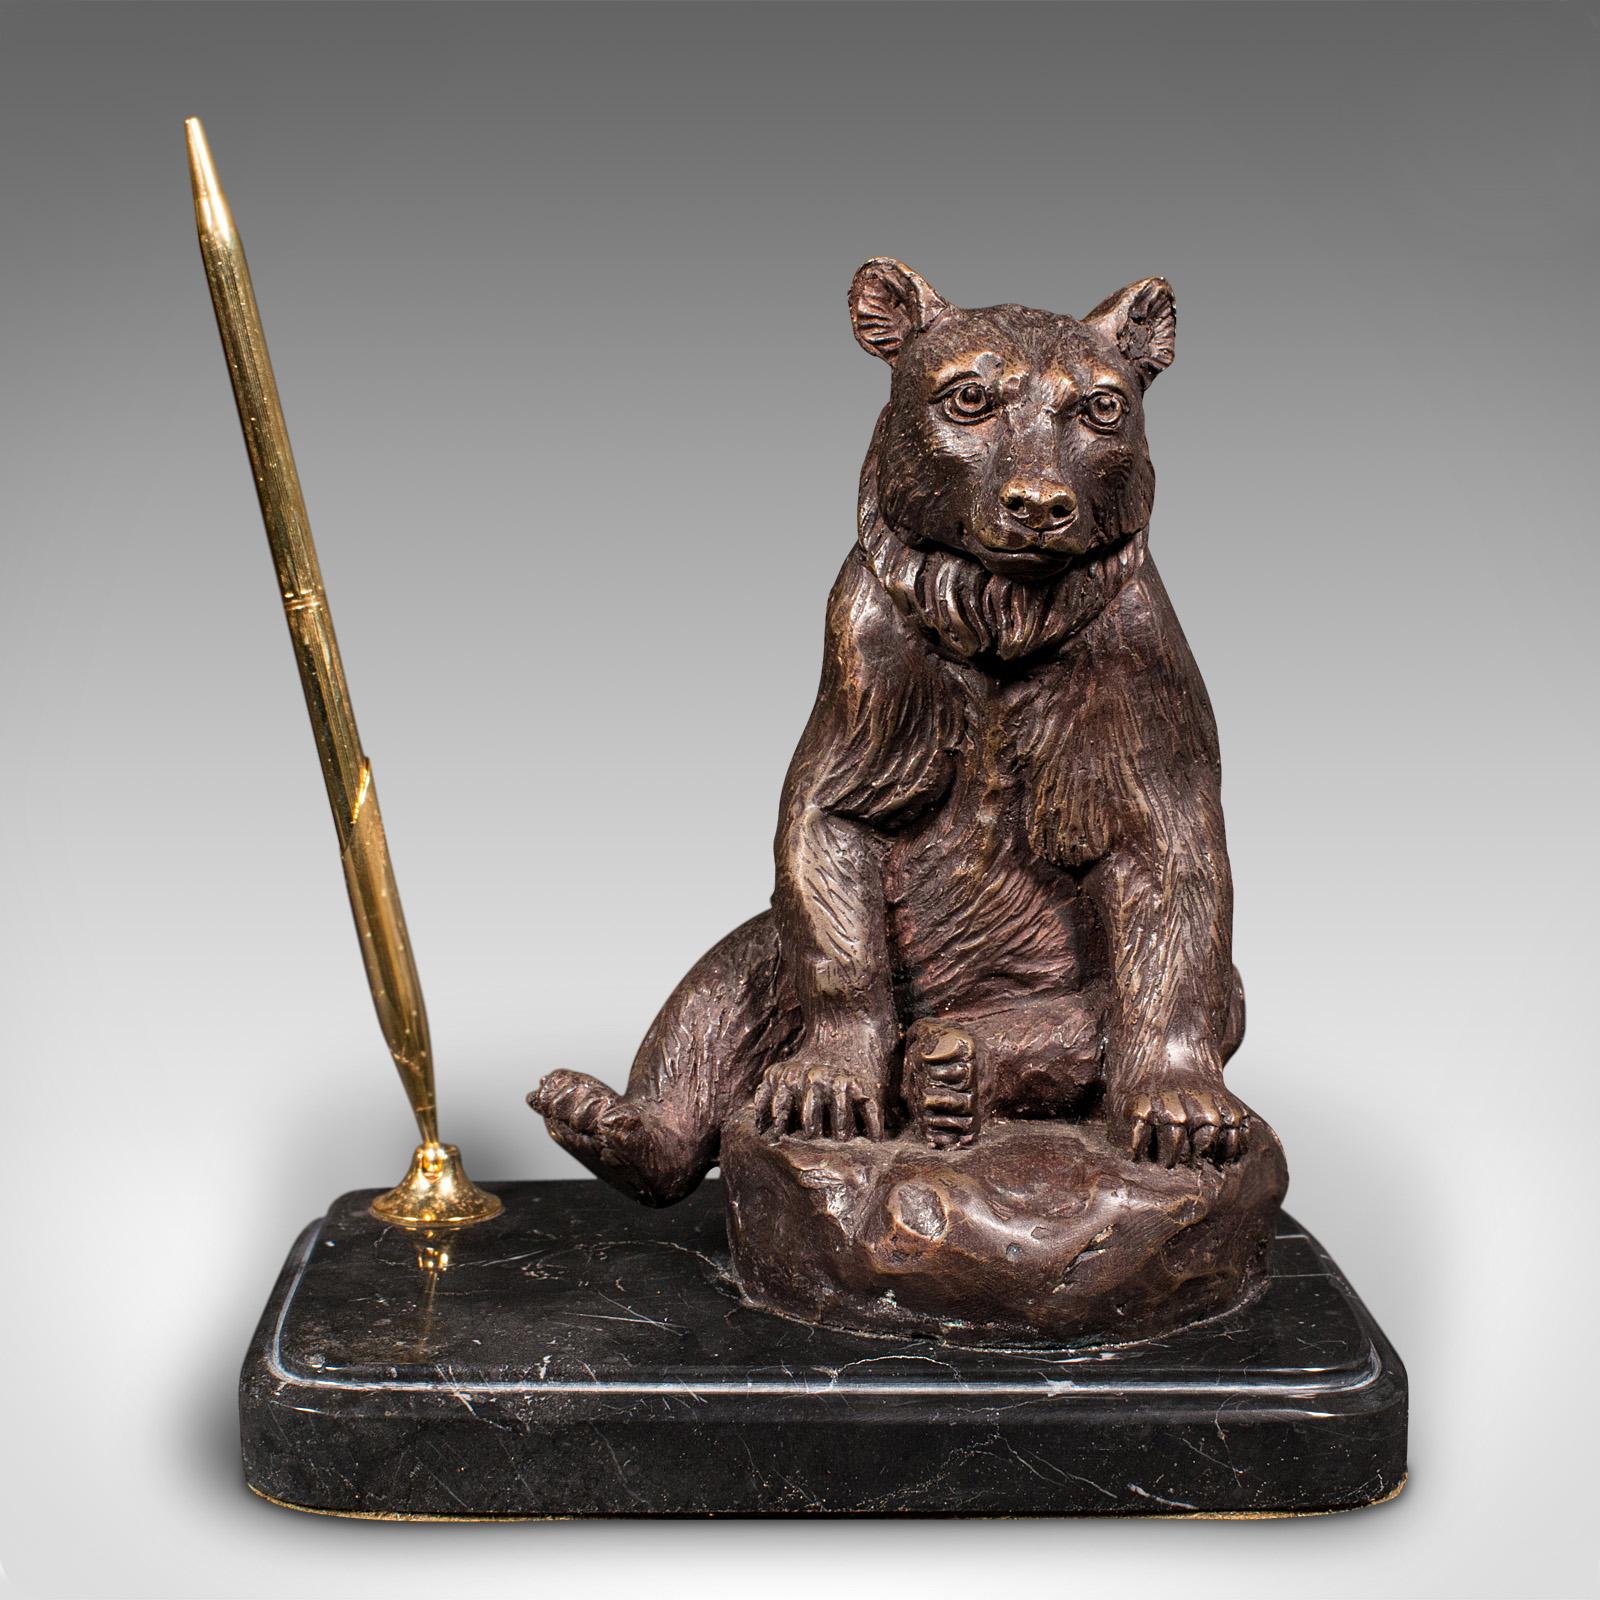 This is a vintage Black Forest bear pen rest. A German, bronze and marble decorative desk Stand, dating to the late 20th century, circa 1970.
Highly distinctive desk Stand with charming bear figure
Displays a desirable aged patina and in good